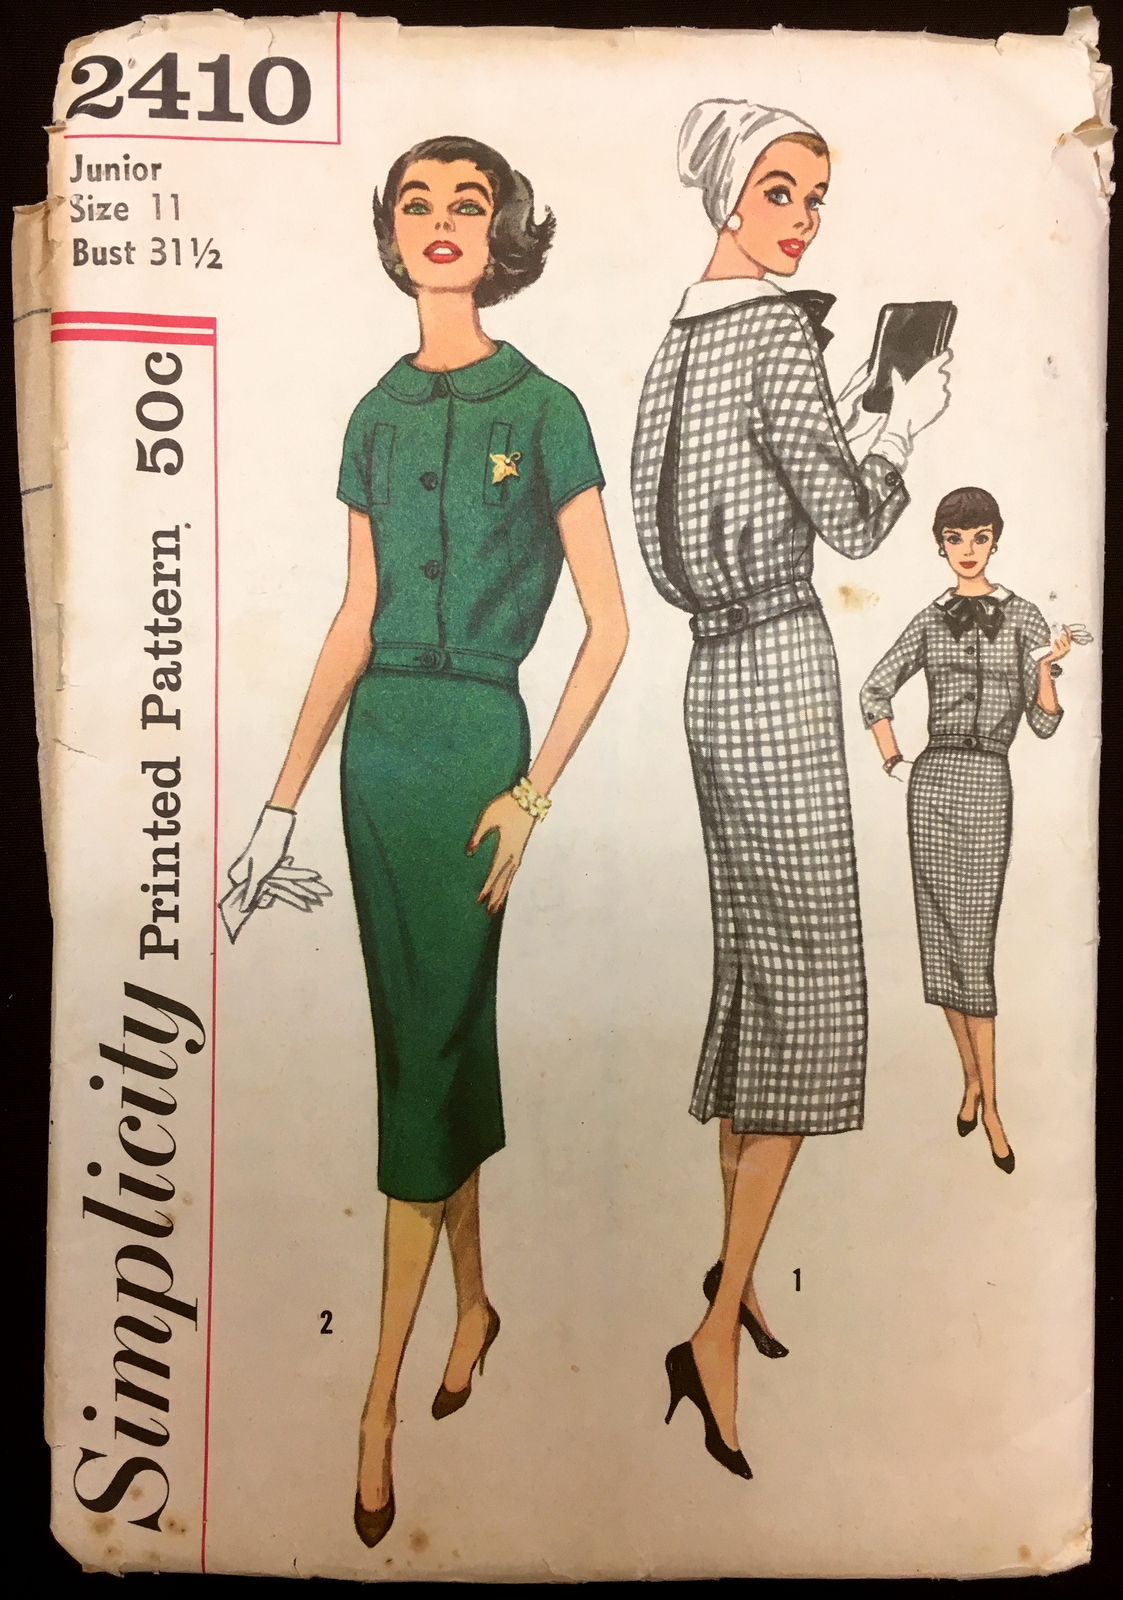 Primary image for 1950s 2 Pc Middy Dress Skirt Top Simplicity 2410 Pattern Bust 31 1/2 Vintage 